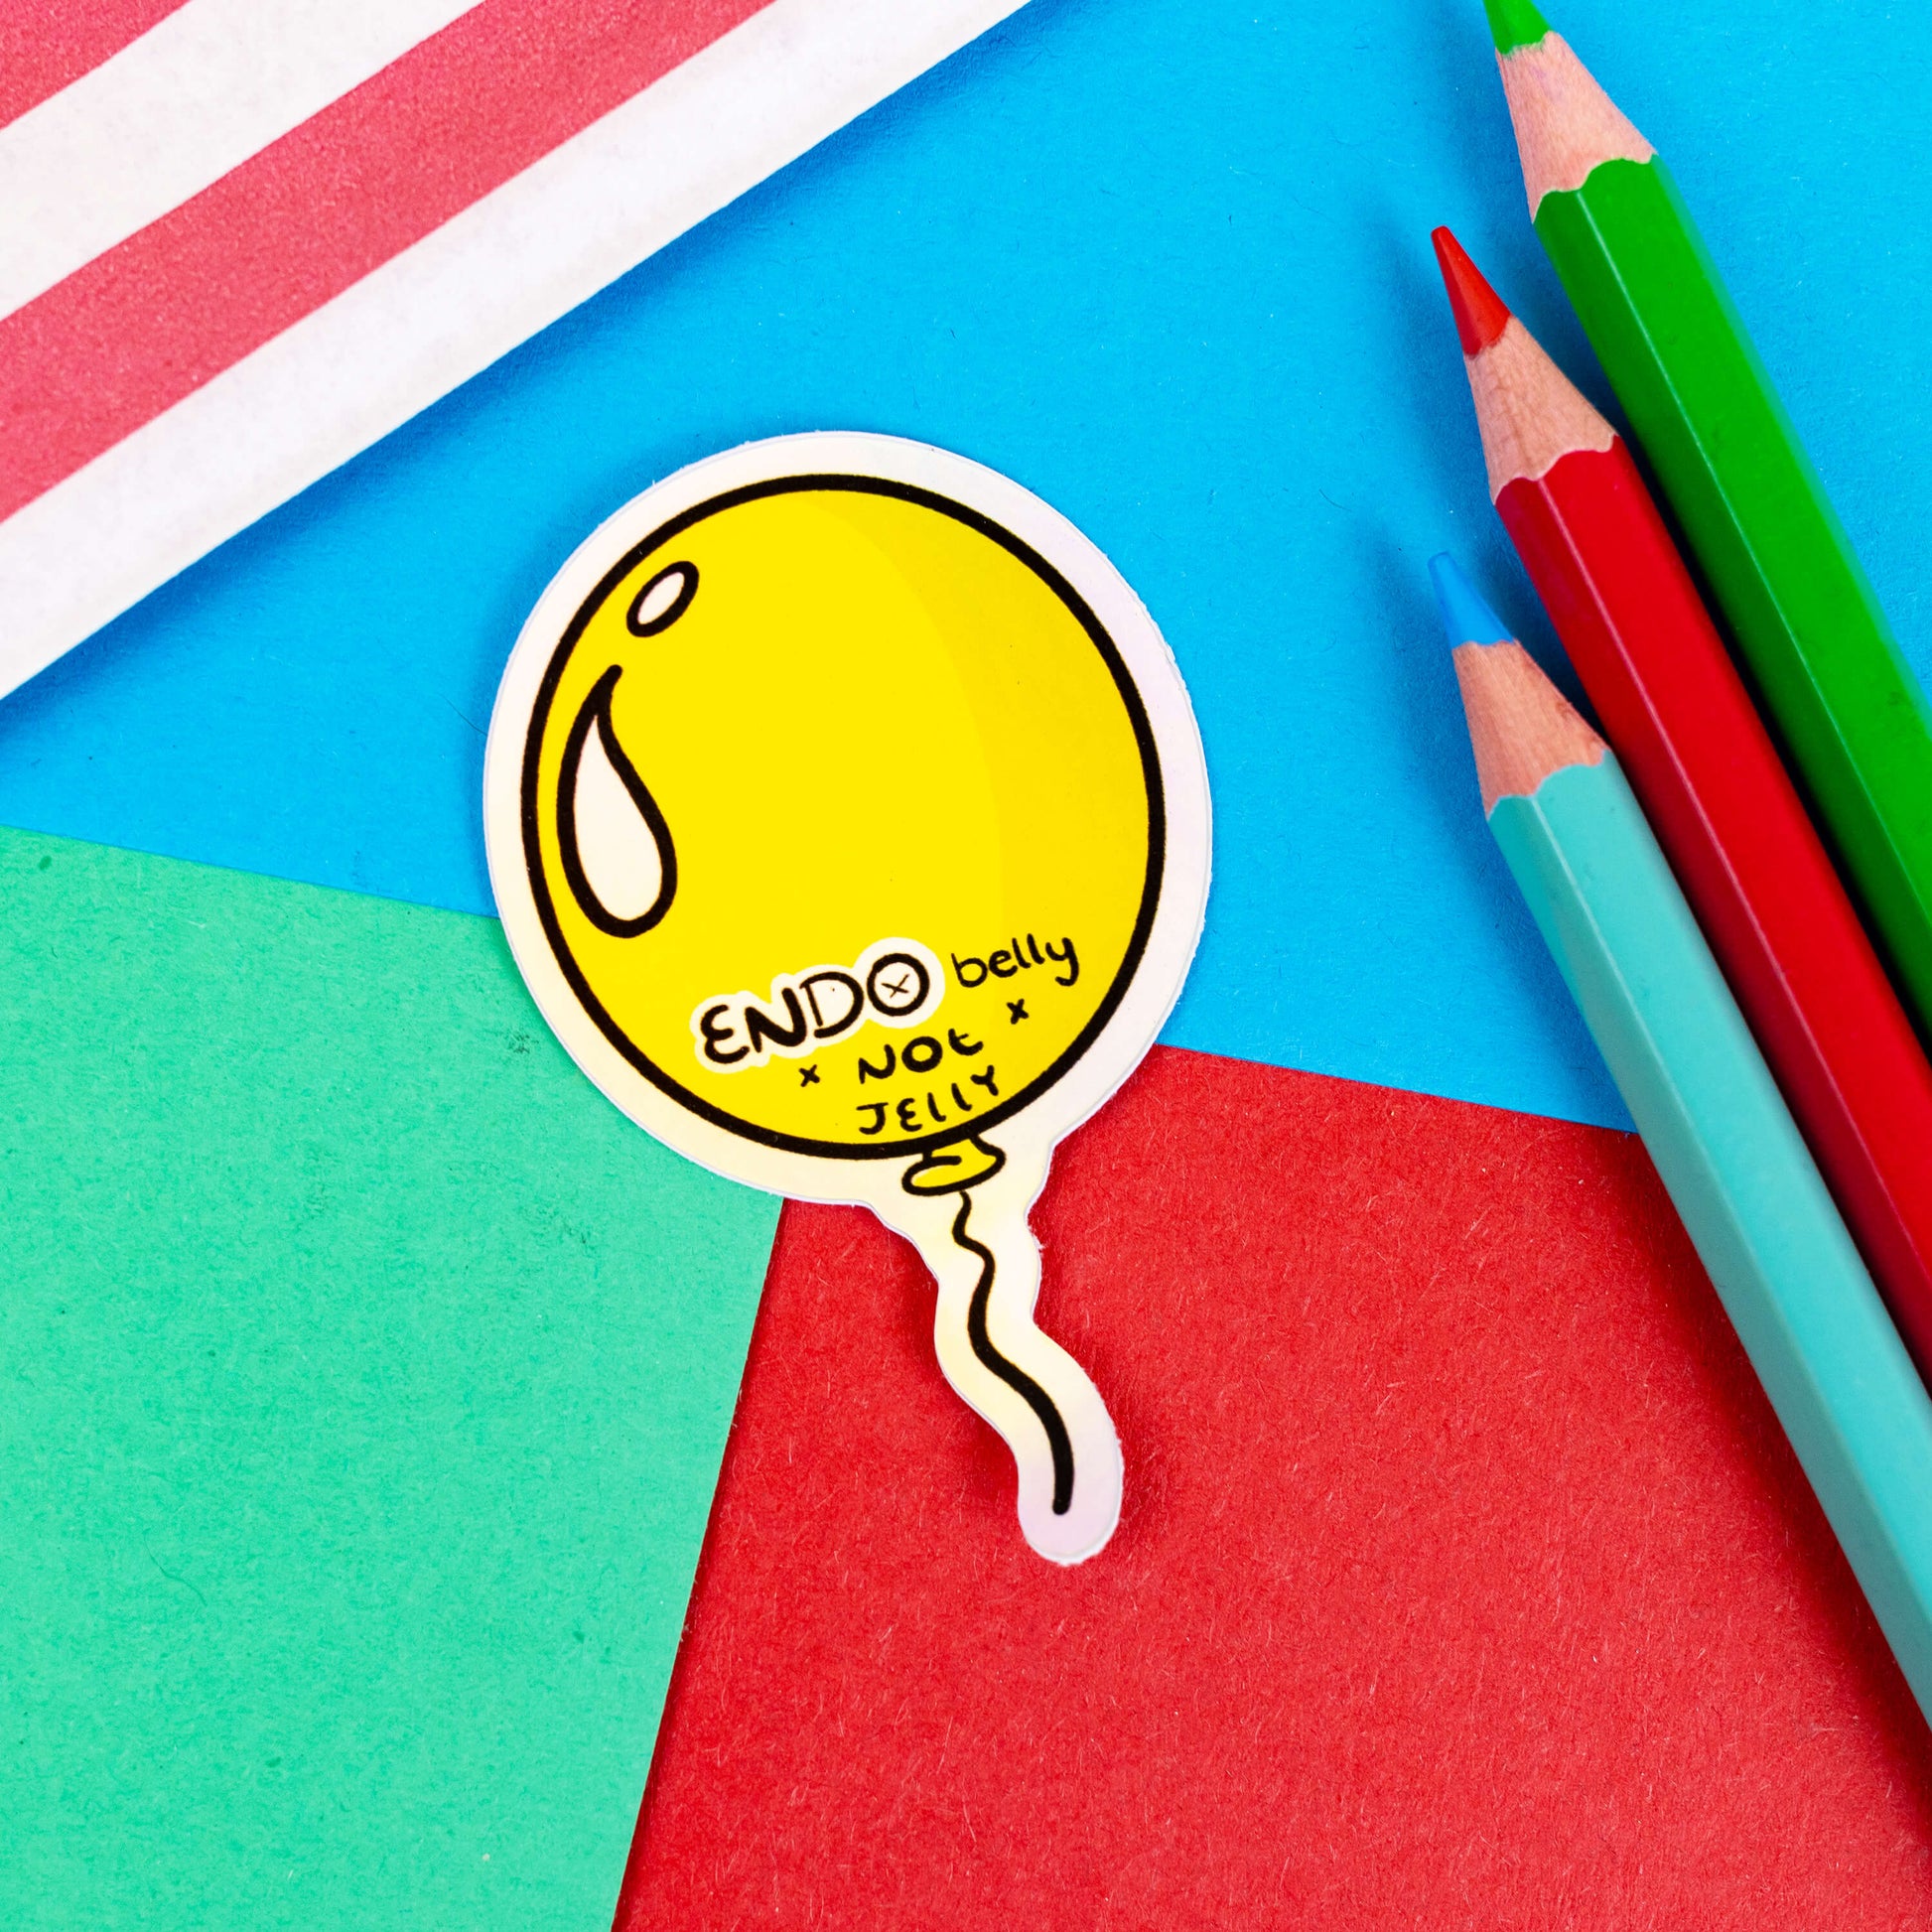 The Endo Belly Sticker on a red, blue and green background with colouring pencils and red stripe candy bag. The yellow balloon shape sticker has bottom black text reading 'ENDO belly not jelly'. The hand drawn design is raising awareness for endometriosis.